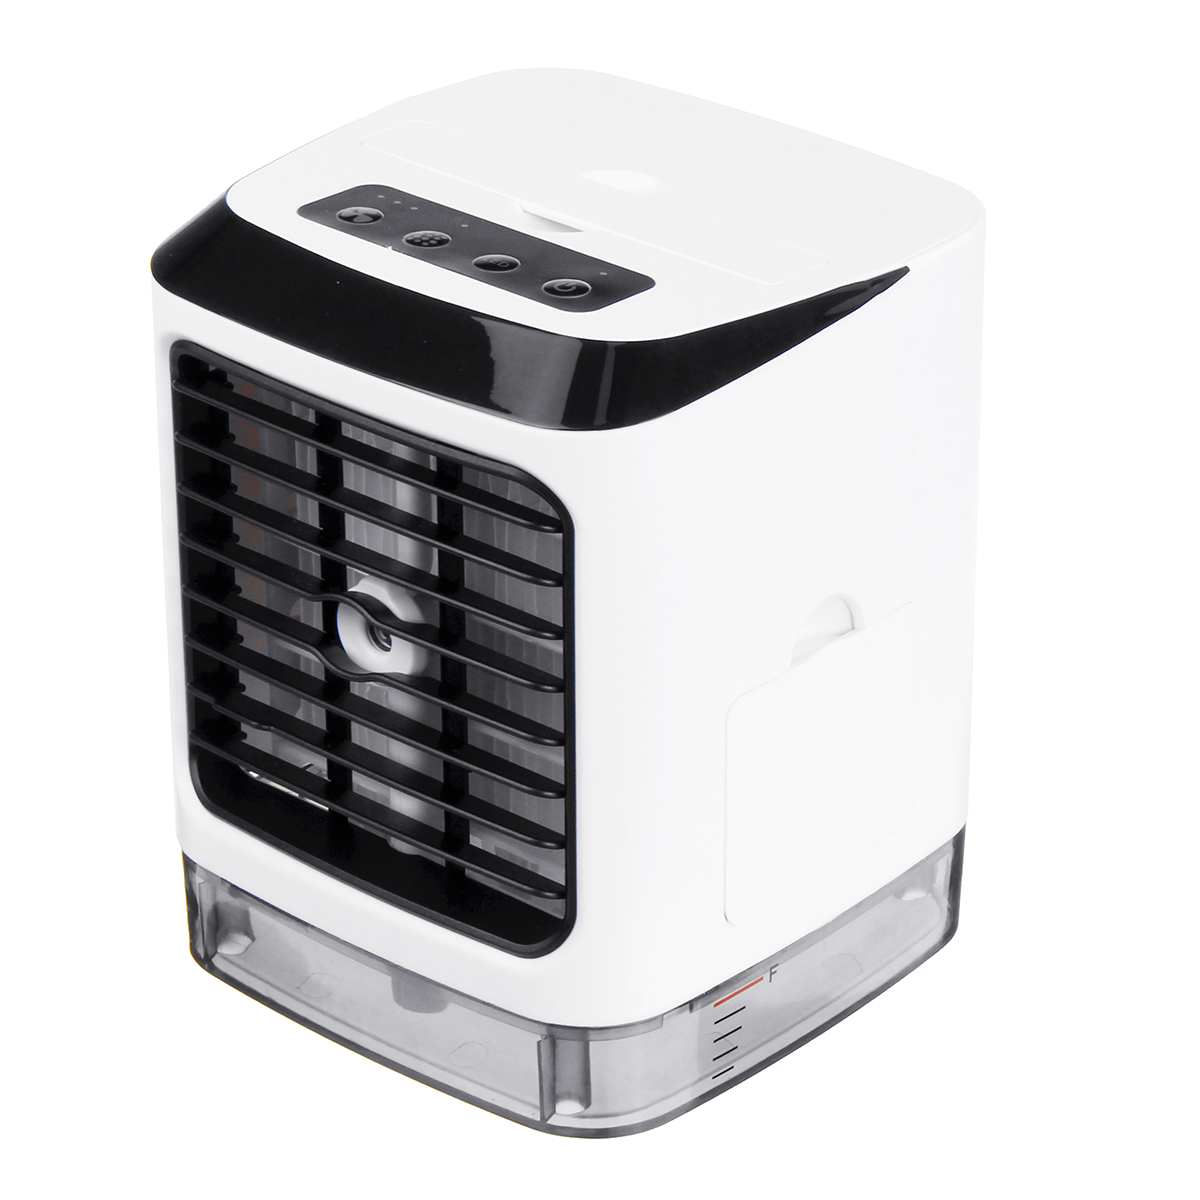 LED-480mL-Personal-Evaporative-Air-Cooler-Humidifier-Portable-Air-Conditioner-Mist-Prayer-USB-Cooler-1479420-9